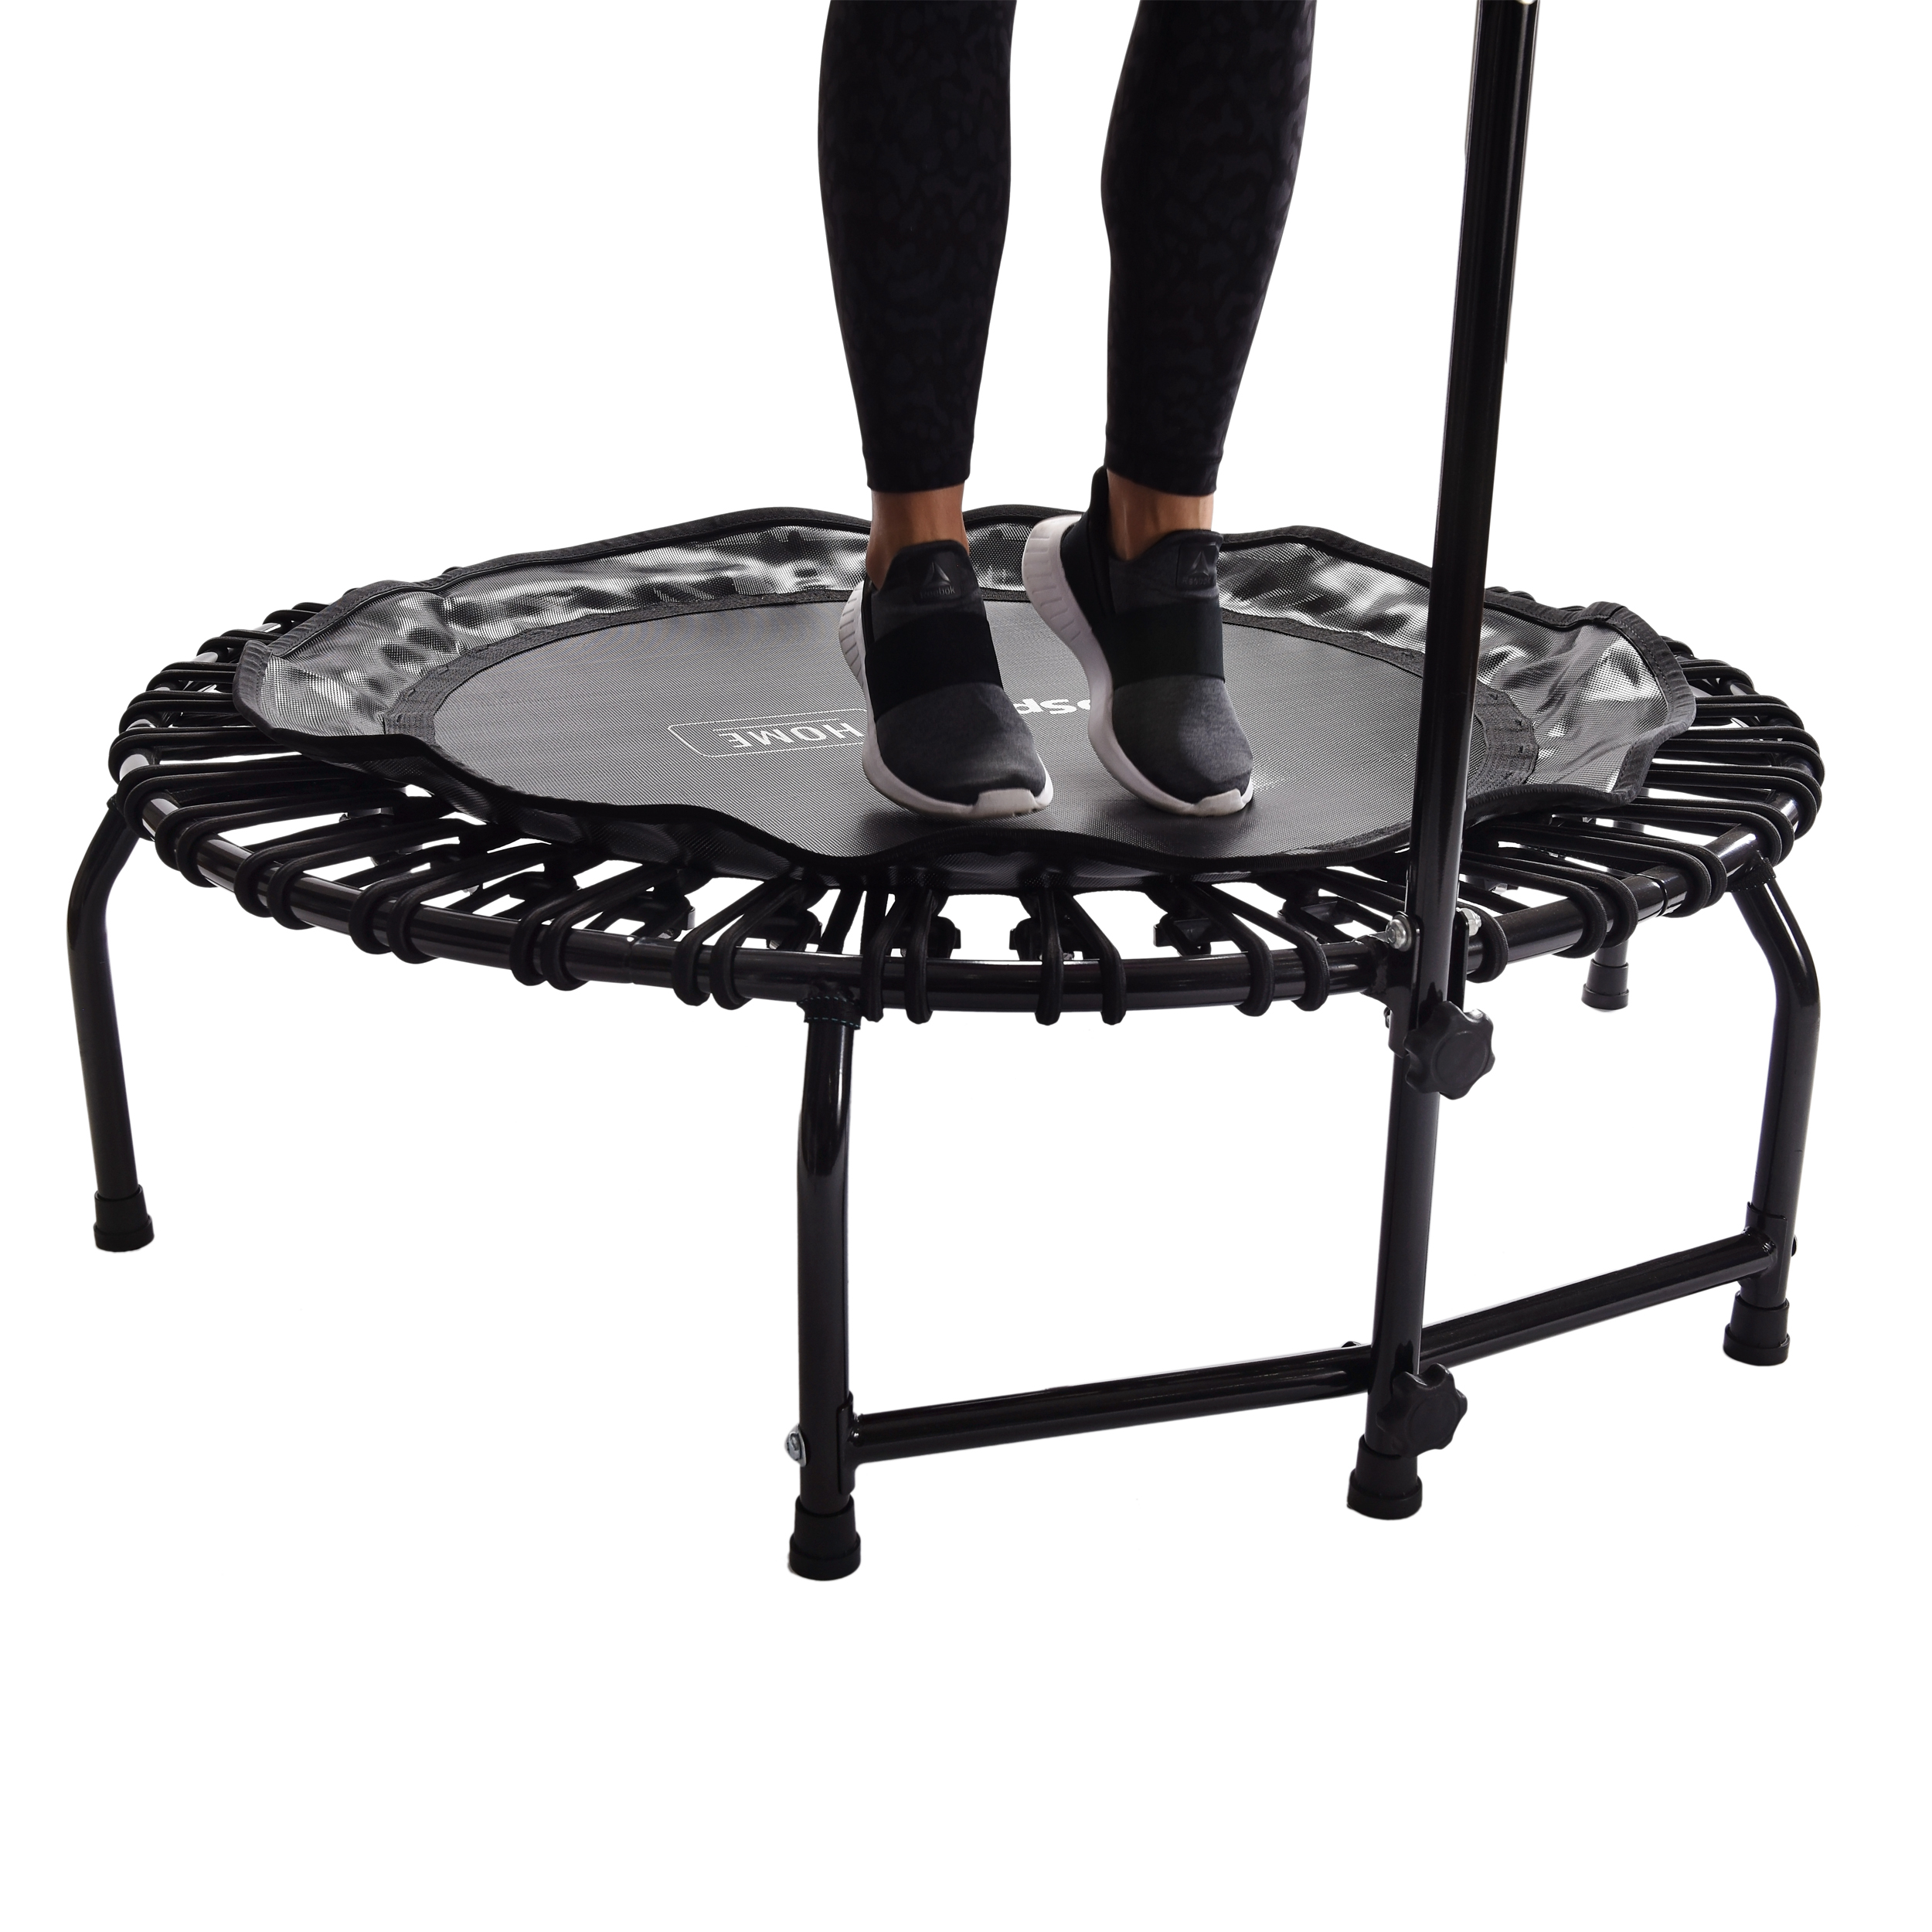 Metode vedholdende Ciro JumpSport Home 120 Fitness Trampoline - Stamina Products